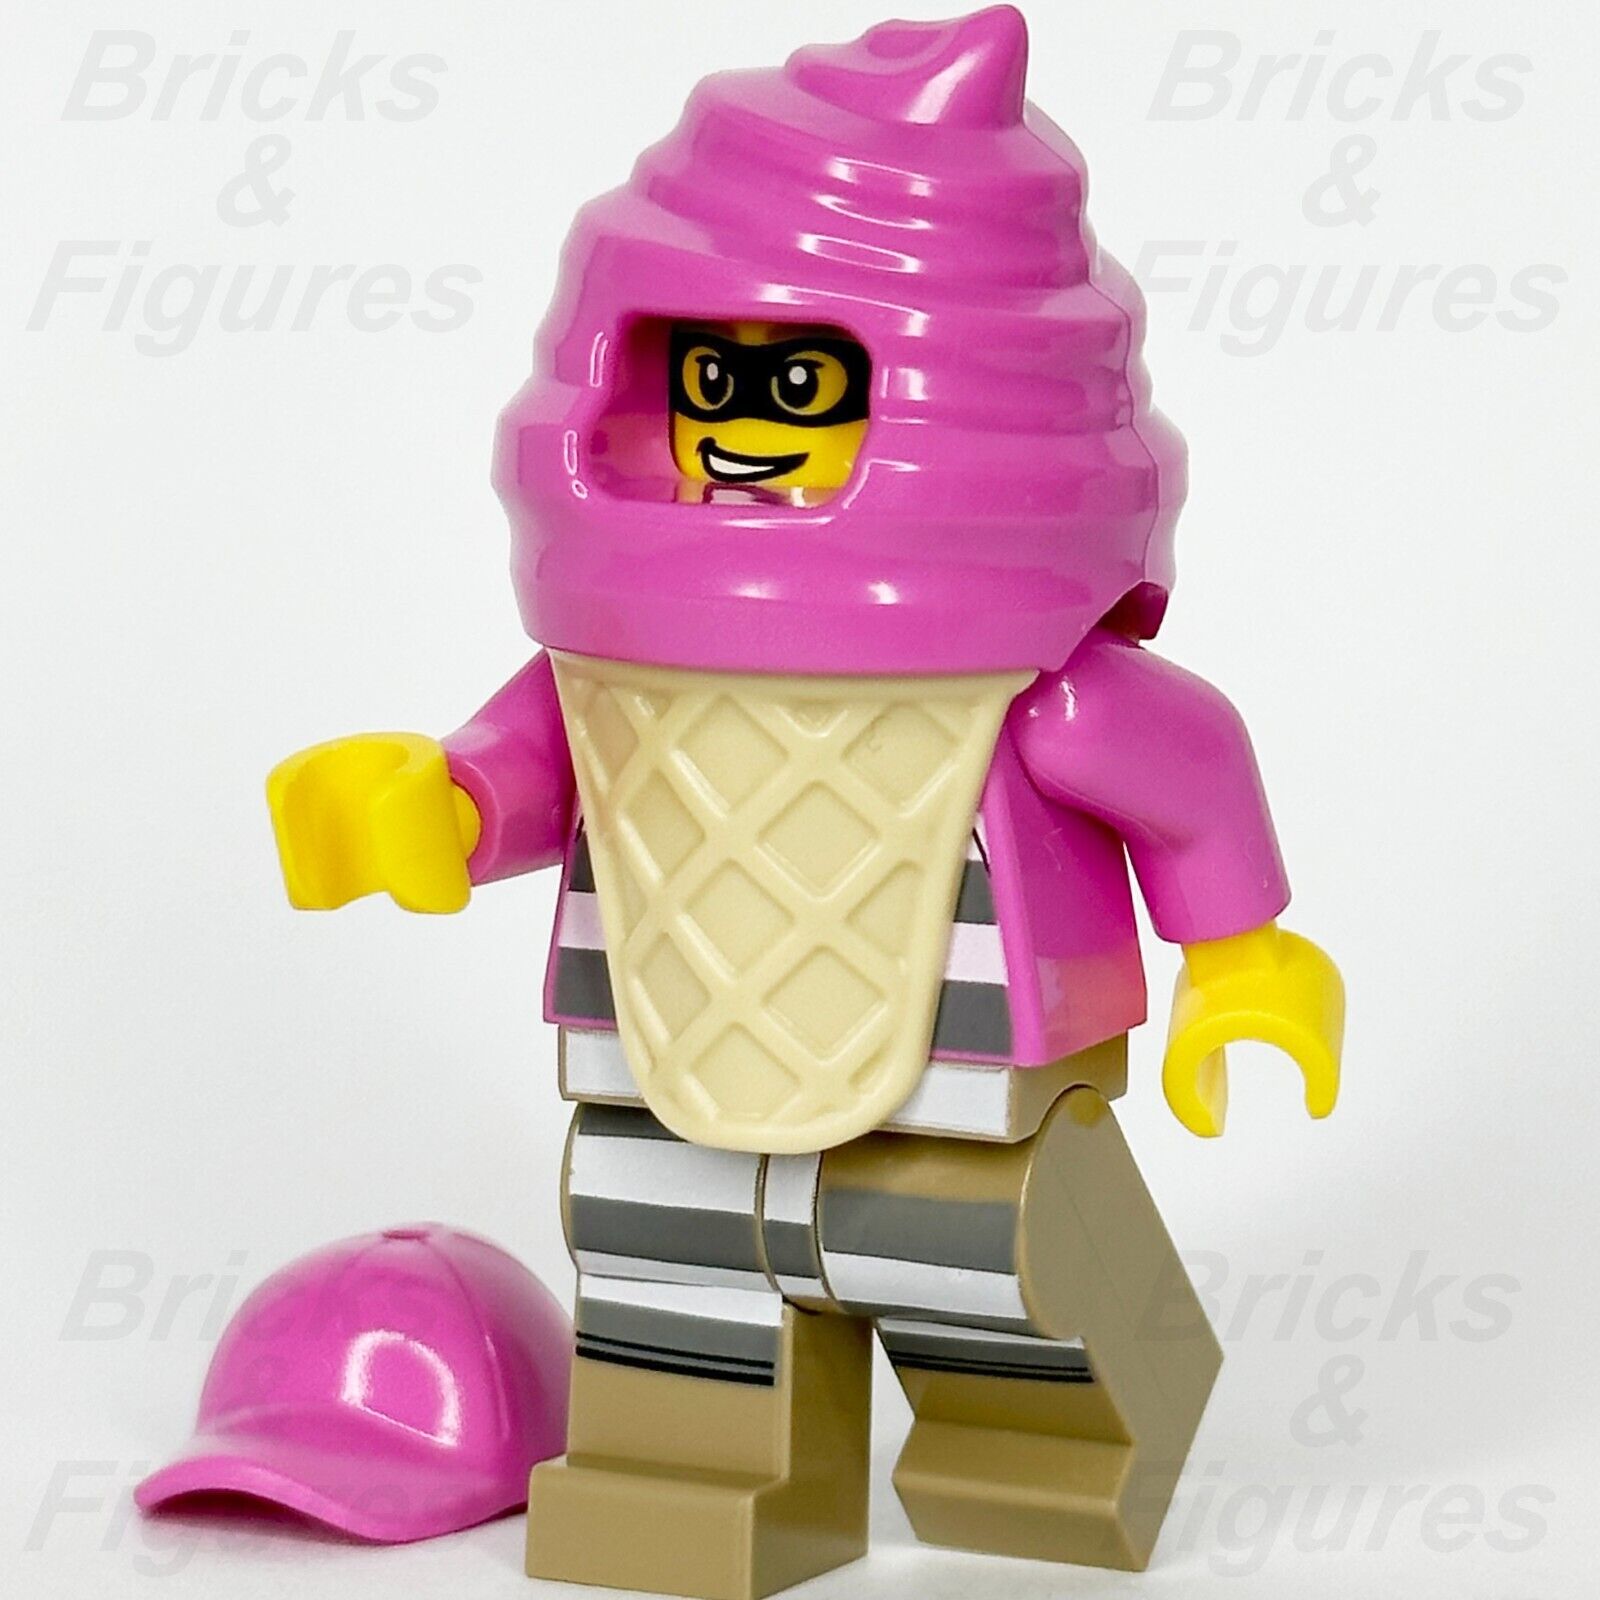 LEGO City Police Crook Cream Minifigure w/ Pink Ice Cream Outfit 60314 cty1385 1